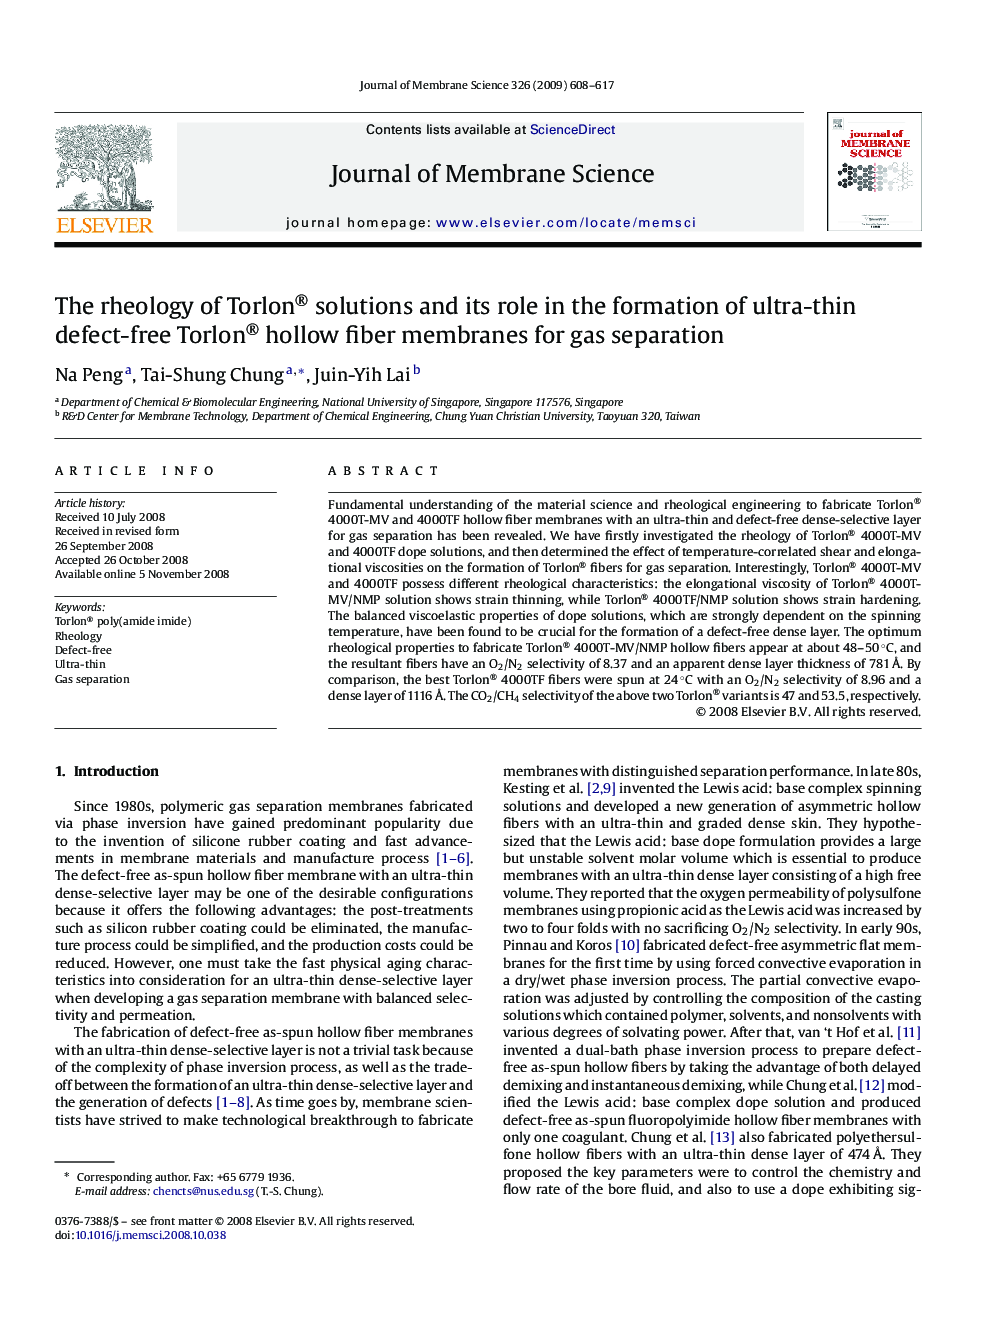 The rheology of Torlon® solutions and its role in the formation of ultra-thin defect-free Torlon® hollow fiber membranes for gas separation